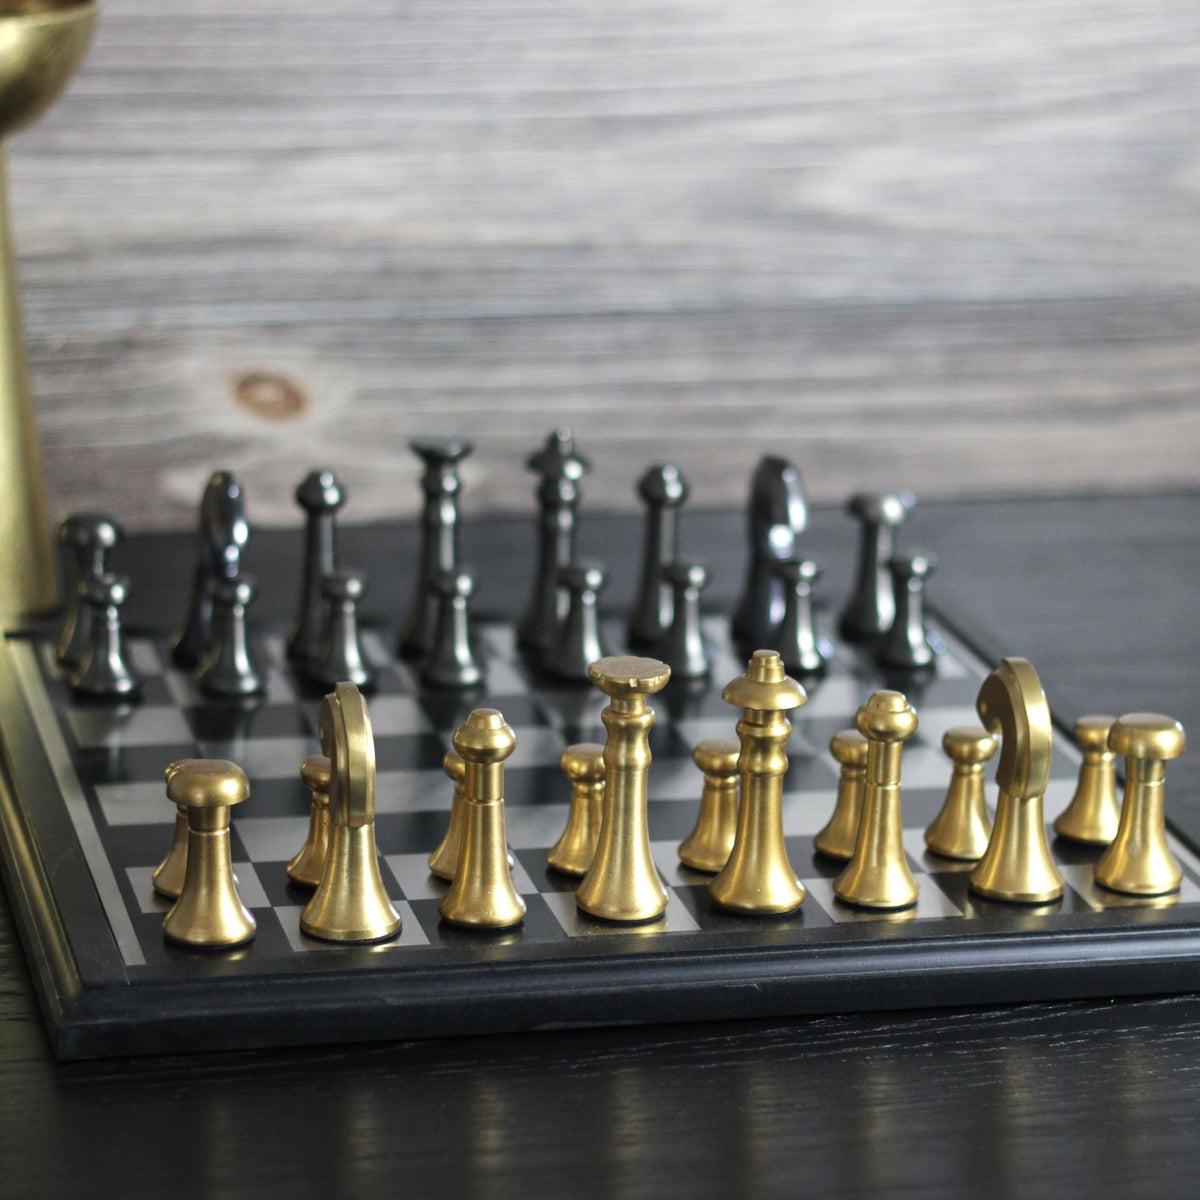 The Modern Defense - Black and Gold Metallic Chess Set - Marble Cultures